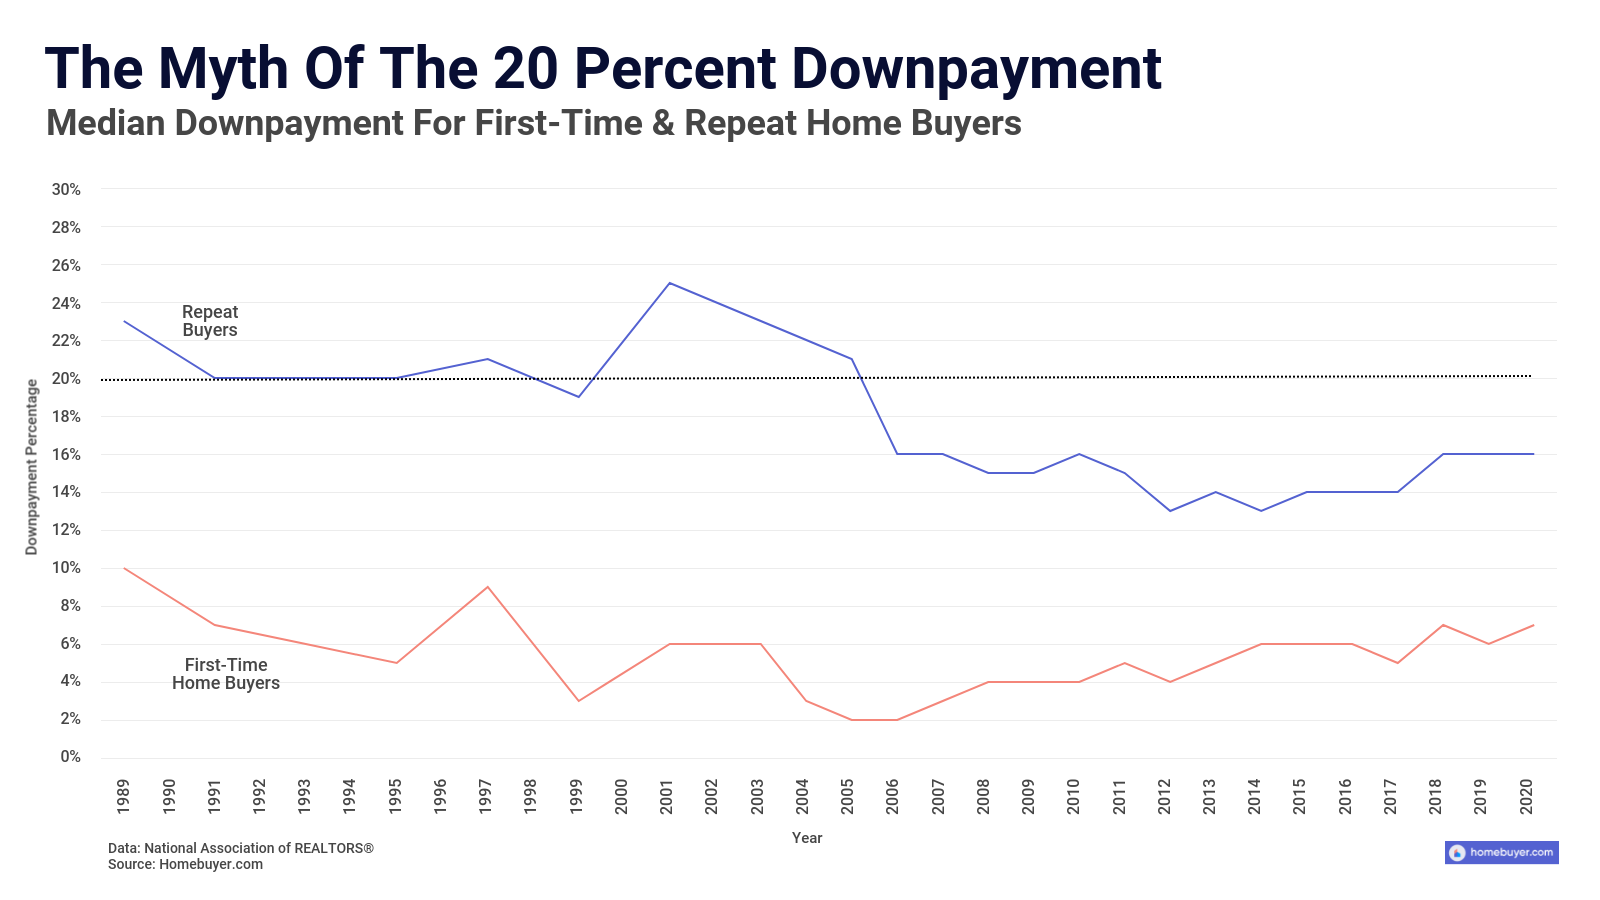 The myth of the 20 percent downpayment